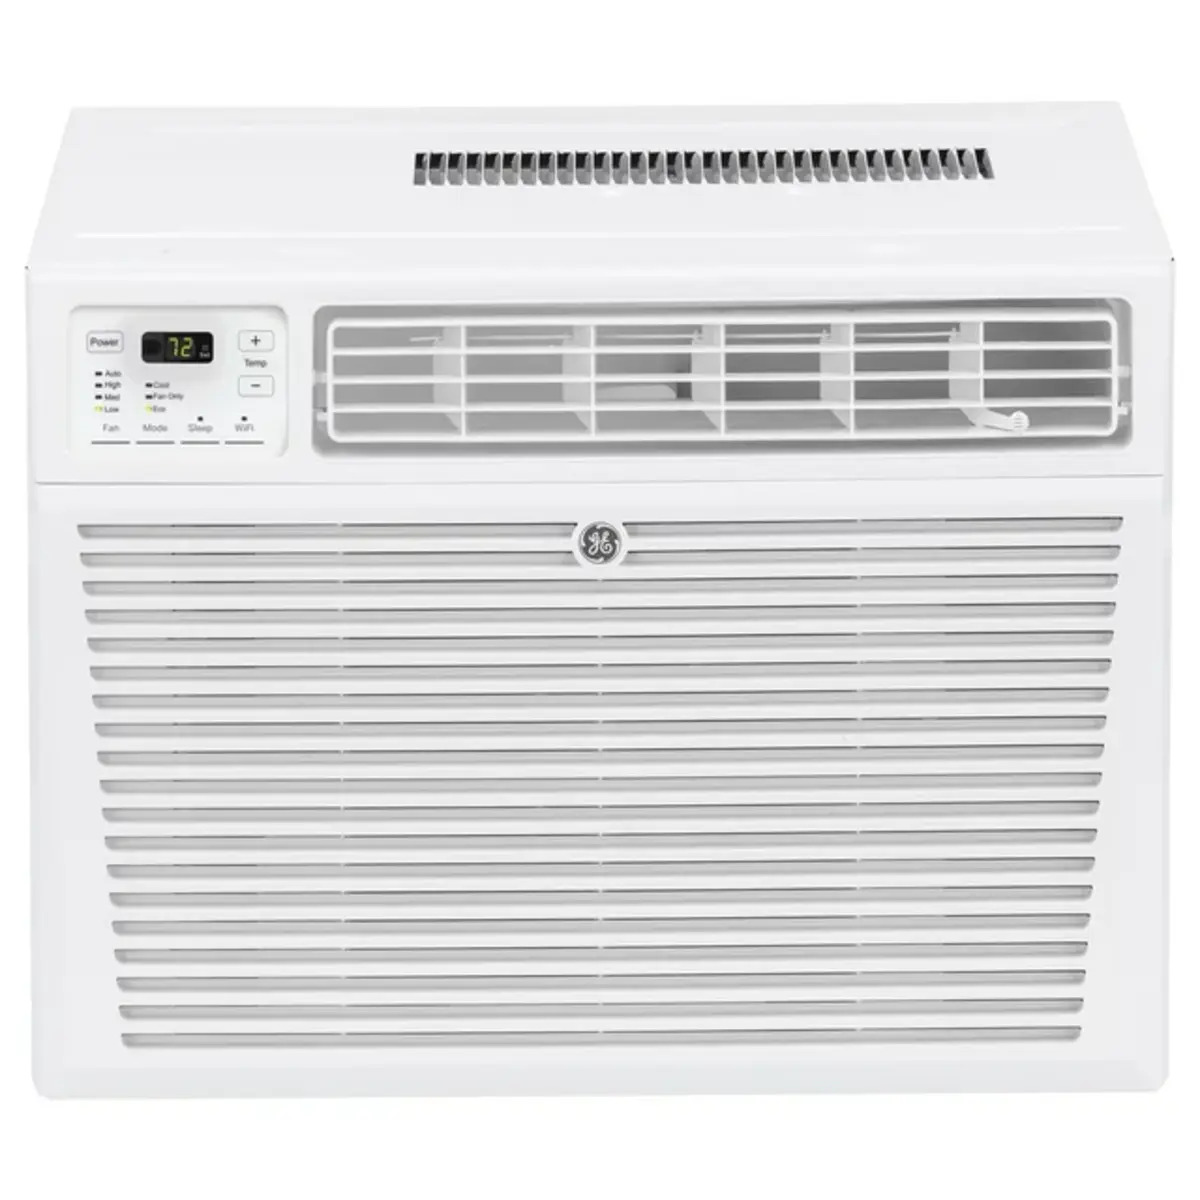 How To Fix The Error Code F22 For GE Air Conditioner